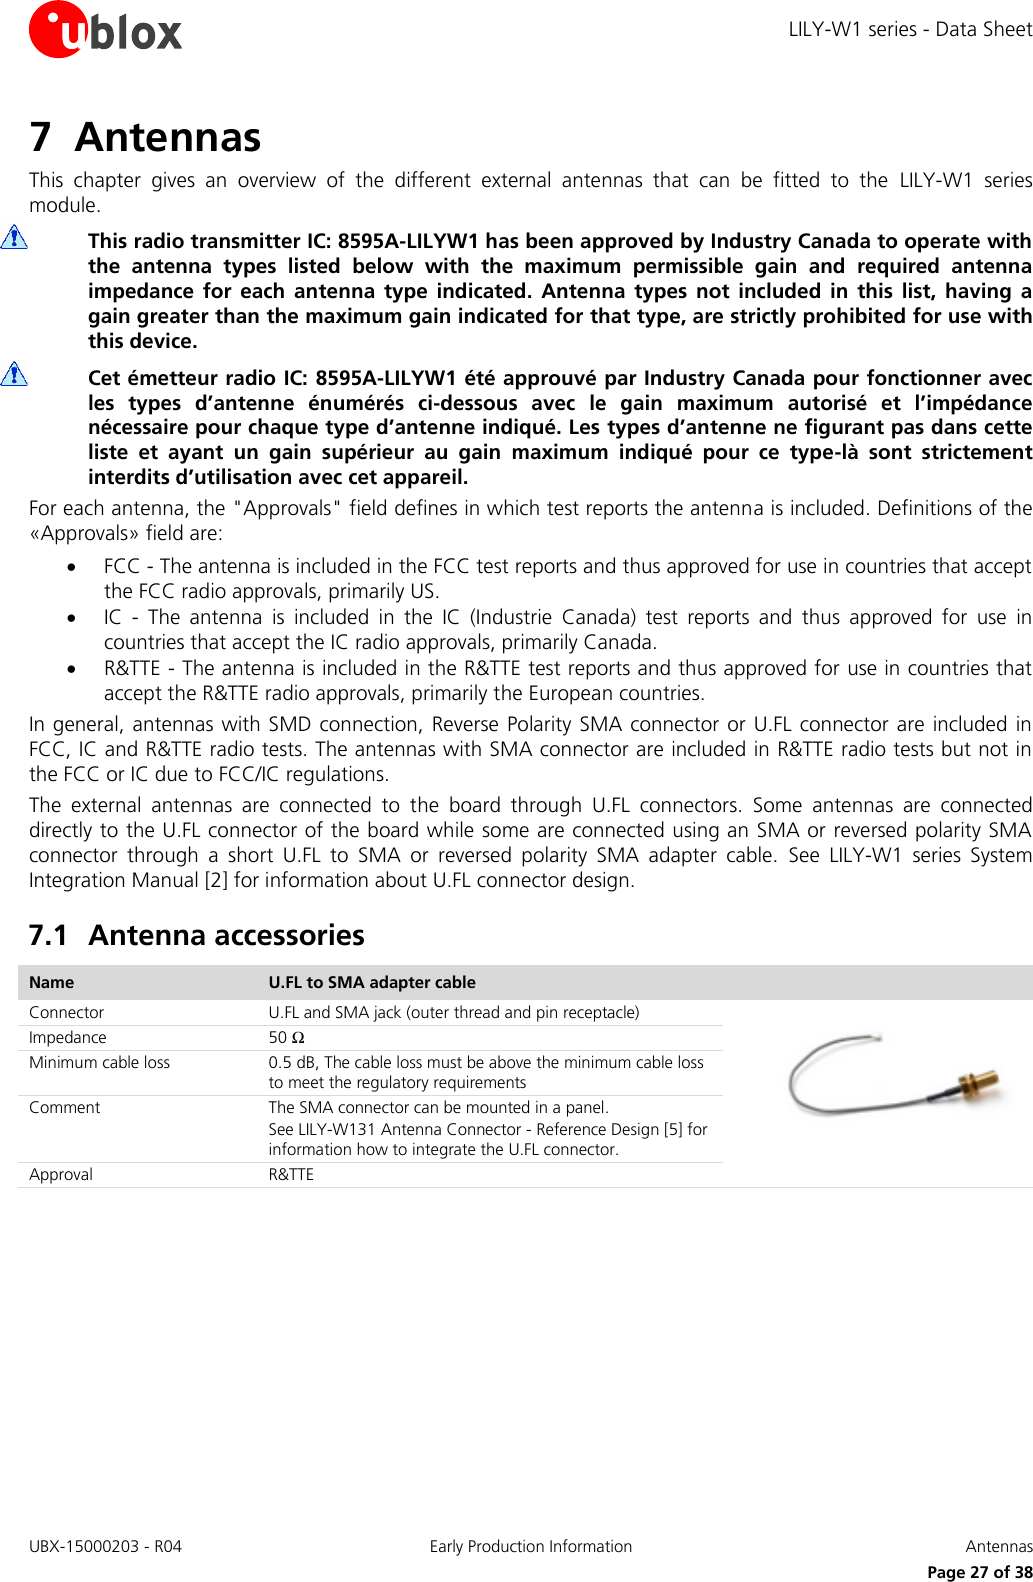 LILY-W1 series - Data Sheet UBX-15000203 - R04 Early Production Information  Antennas     Page 27 of 38 7 Antennas This  chapter  gives  an  overview  of  the  different  external  antennas  that  can  be  fitted  to  the  LILY-W1  series module.    This radio transmitter IC: 8595A-LILYW1 has been approved by Industry Canada to operate with the  antenna  types  listed  below  with  the  maximum  permissible  gain  and  required  antenna impedance  for  each  antenna  type  indicated.  Antenna  types  not  included  in  this  list,  having  a gain greater than the maximum gain indicated for that type, are strictly prohibited for use with this device.  Cet émetteur radio IC: 8595A-LILYW1 été approuvé par Industry Canada pour fonctionner avec les  types  d’antenne  énumérés  ci-dessous  avec  le  gain  maximum  autorisé  et  l’impédance nécessaire pour chaque type d’antenne indiqué. Les types d’antenne ne figurant pas dans cette liste  et  ayant  un  gain  supérieur  au  gain  maximum  indiqué  pour  ce  type-là  sont  strictement interdits d’utilisation avec cet appareil. For each antenna, the &quot;Approvals&quot; field defines in which test reports the antenna is included. Definitions of the «Approvals» field are:  FCC - The antenna is included in the FCC test reports and thus approved for use in countries that accept the FCC radio approvals, primarily US.  IC  -  The  antenna  is  included  in  the  IC  (Industrie  Canada)  test  reports  and  thus  approved  for  use  in countries that accept the IC radio approvals, primarily Canada.  R&amp;TTE - The antenna is included in the R&amp;TTE test reports and thus approved for use in countries that accept the R&amp;TTE radio approvals, primarily the European countries. In general, antennas with SMD connection, Reverse  Polarity  SMA  connector  or  U.FL  connector  are included in FCC, IC and R&amp;TTE radio tests. The antennas with SMA connector are included in R&amp;TTE radio tests but not in the FCC or IC due to FCC/IC regulations.  The  external  antennas  are  connected  to  the  board  through  U.FL  connectors.  Some  antennas  are  connected directly to the U.FL connector of the board while some are connected using an SMA or reversed polarity SMA connector  through  a  short  U.FL  to  SMA  or  reversed  polarity  SMA  adapter  cable.  See  LILY-W1  series  System Integration Manual [2] for information about U.FL connector design. 7.1 Antenna accessories Name U.FL to SMA adapter cable  Connector U.FL and SMA jack (outer thread and pin receptacle)  Impedance 50 Ω Minimum cable loss 0.5 dB, The cable loss must be above the minimum cable loss to meet the regulatory requirements Comment The SMA connector can be mounted in a panel. See LILY-W131 Antenna Connector - Reference Design [5] for  information how to integrate the U.FL connector. Approval R&amp;TTE  